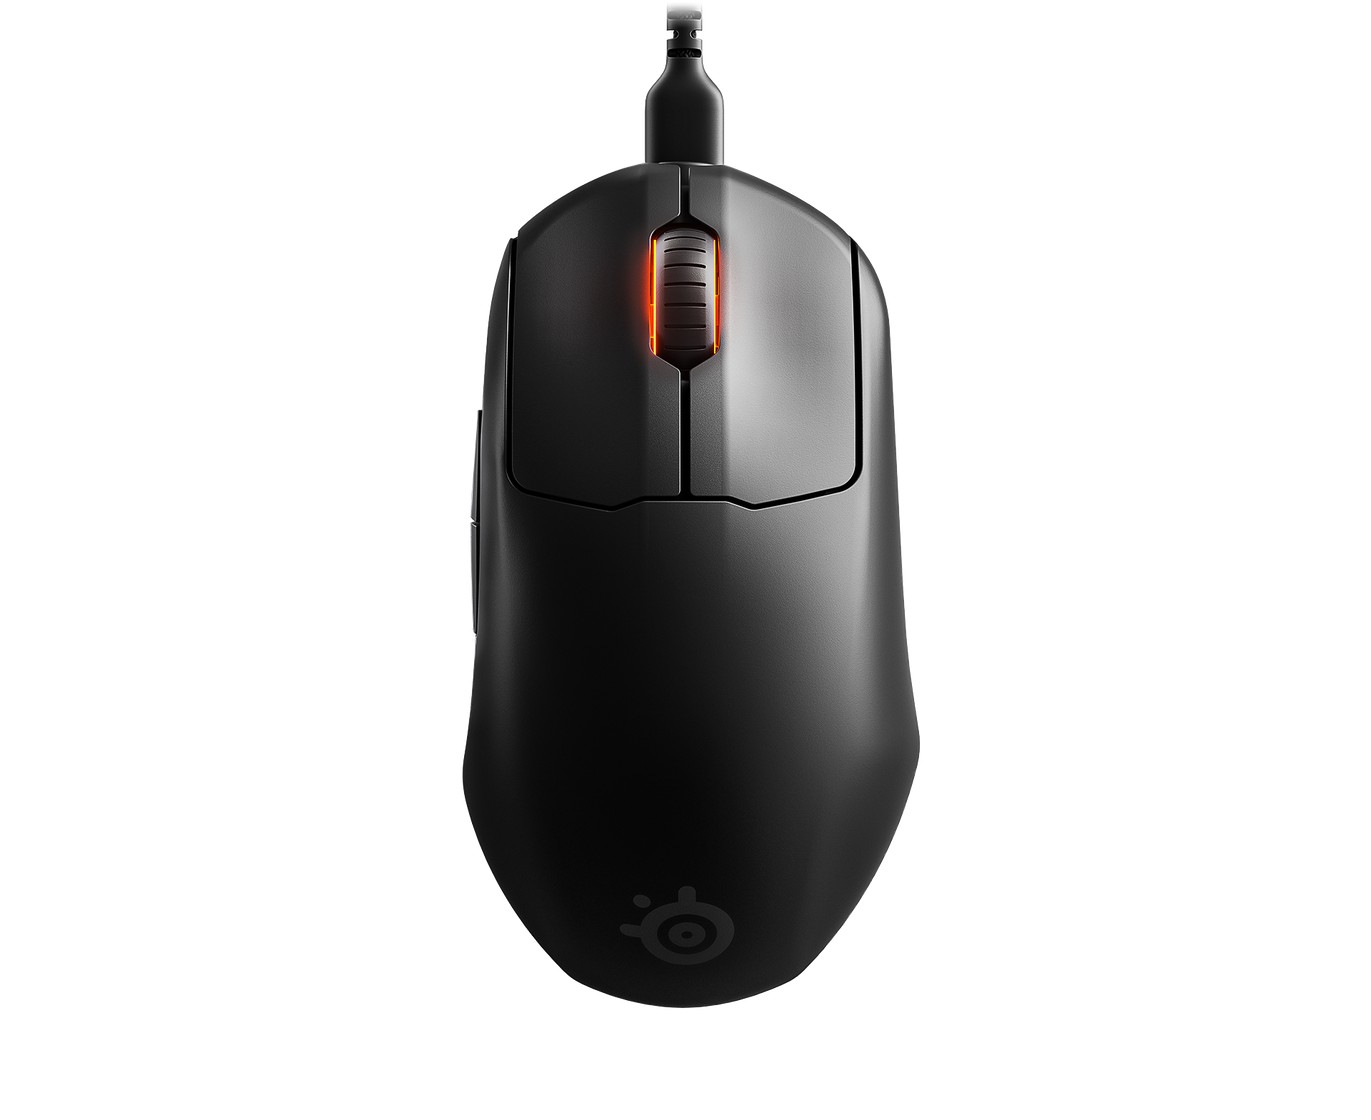 Steelseries Prime MiniGaming Mouse |18000 DPI